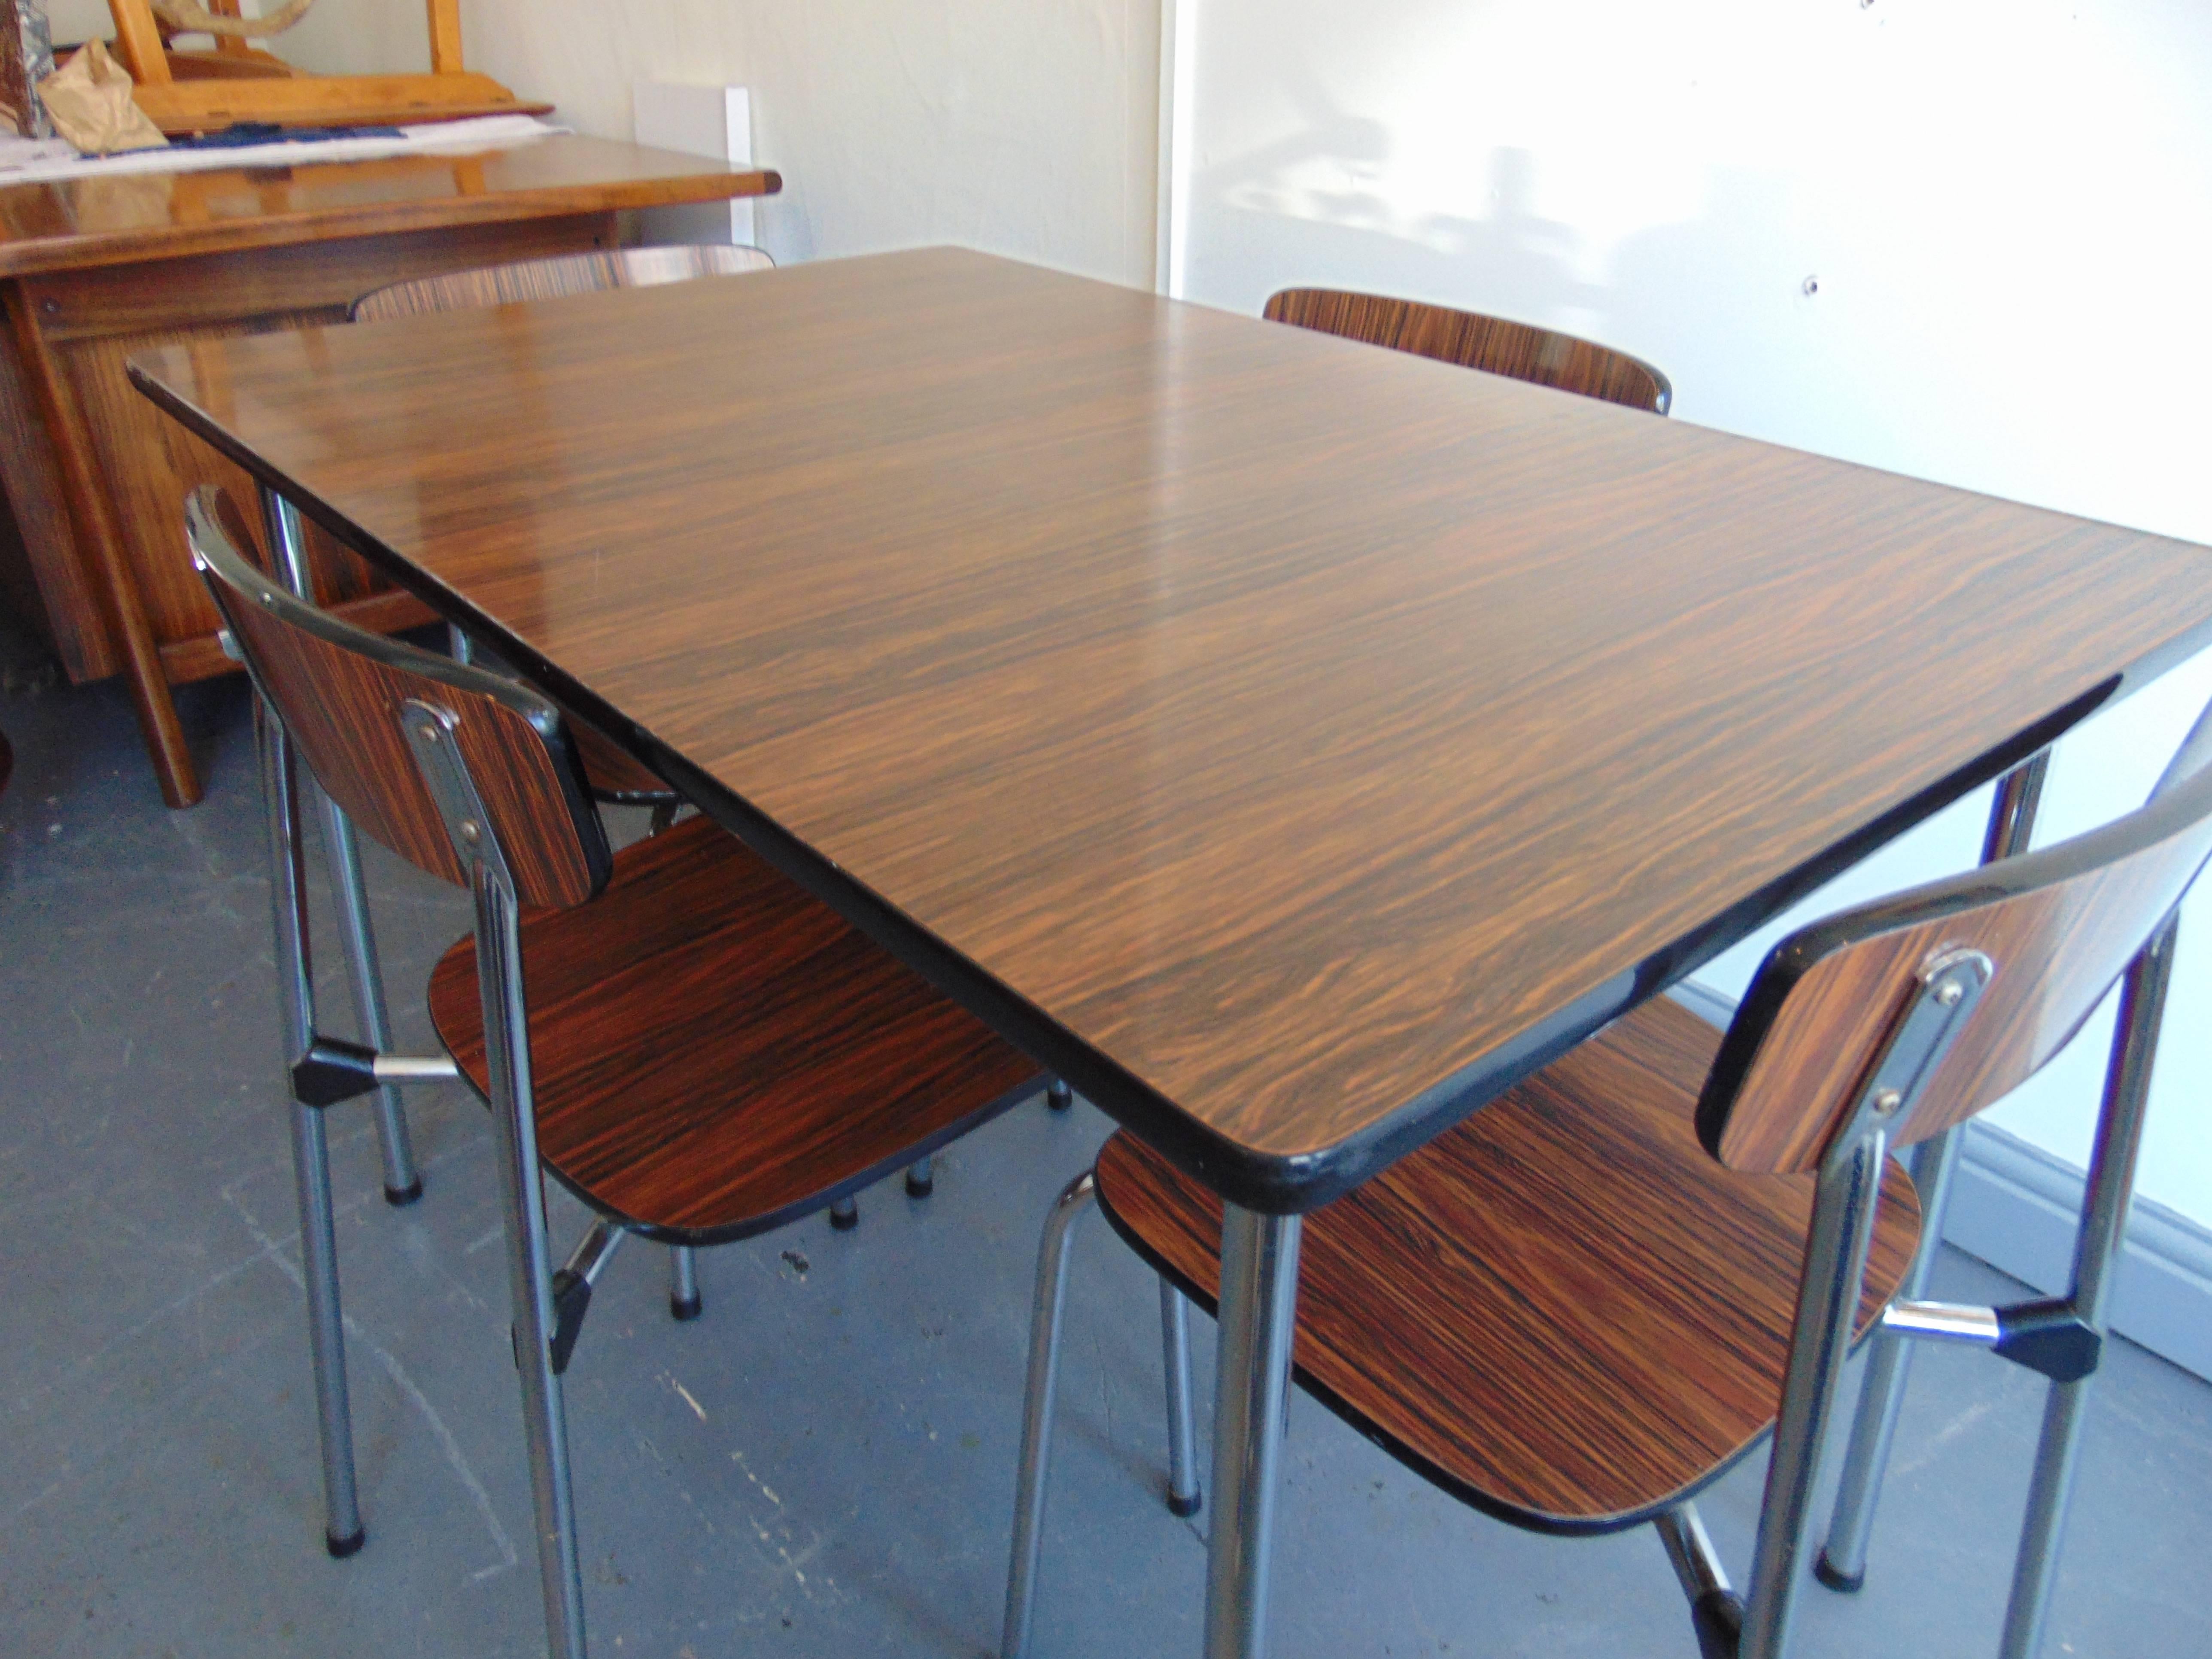 Vintage dining table and four chairs by Tavo of Belgium.

A Mid-Century dining table and chair set from Belgium.
A simulated rosewood dining table on aluminum legs, together with four matching stacking chairs.
Manufactured by Tavo of Belgium in